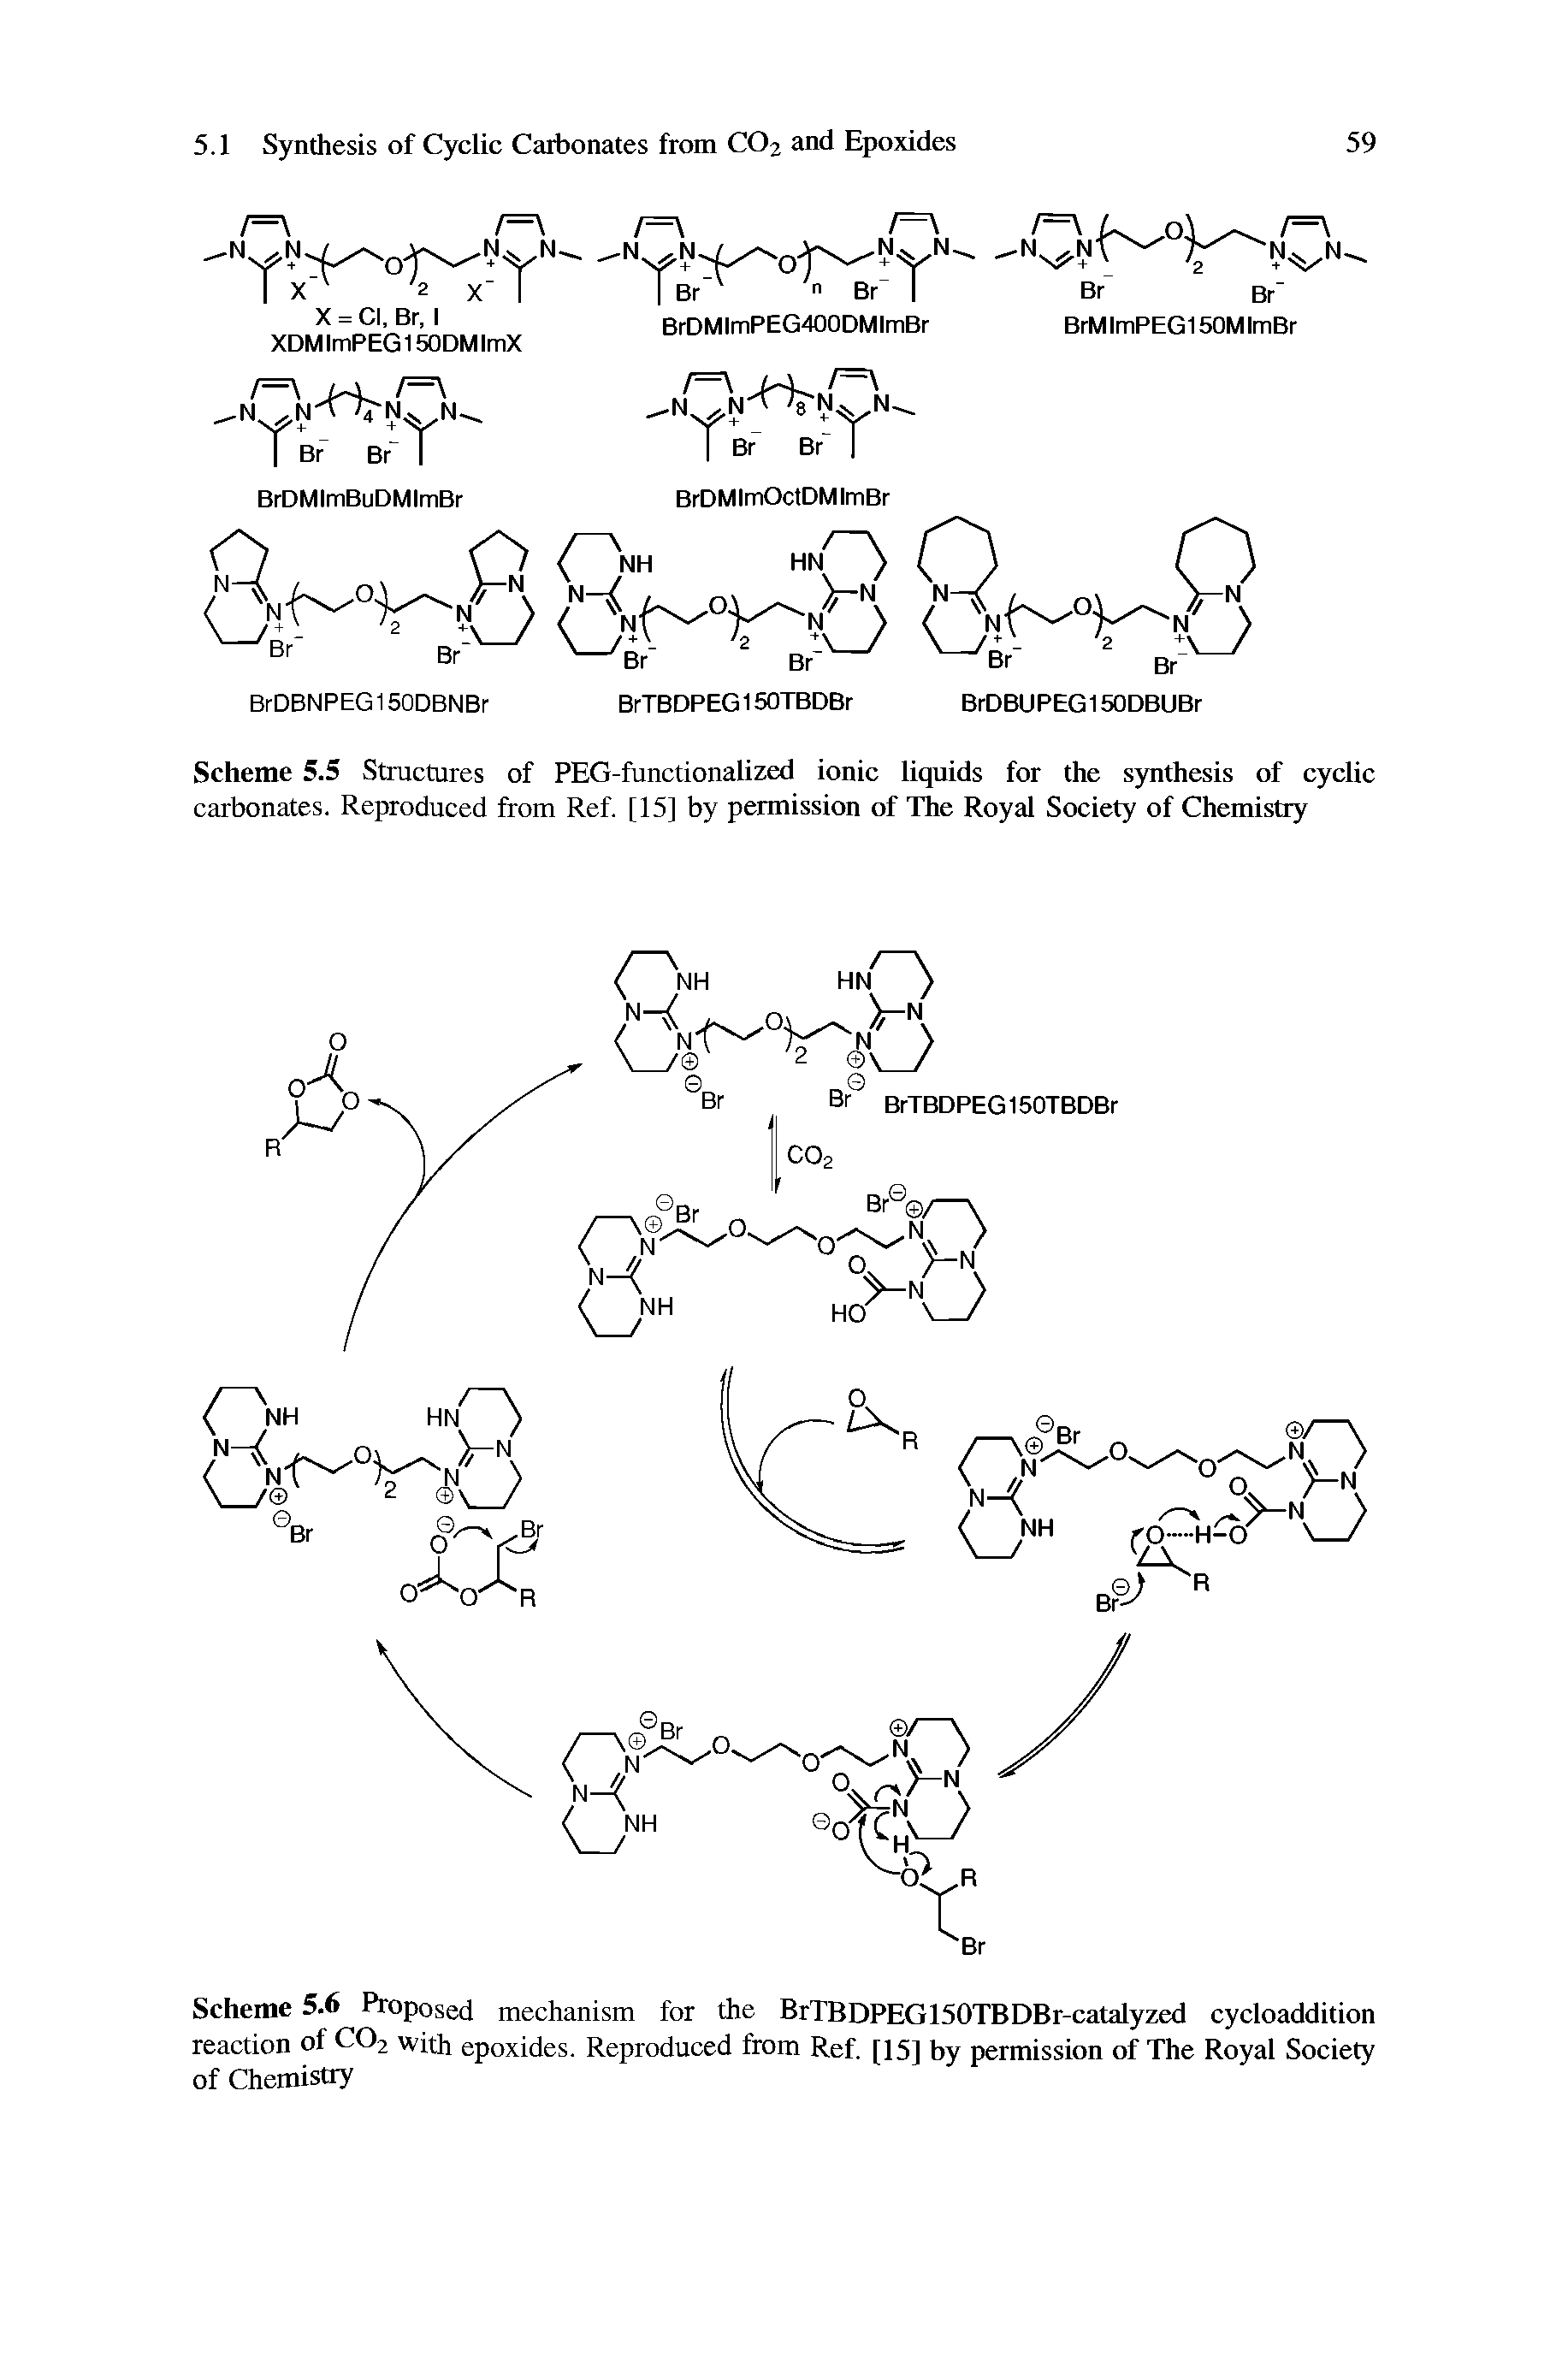 Scheme 5.5 Structures of PEG-functionalized ionic liquids for the synthesis of cyclic carbonates. Reproduced from Ref. [15] by permission of The Royal Society of Chemistry...